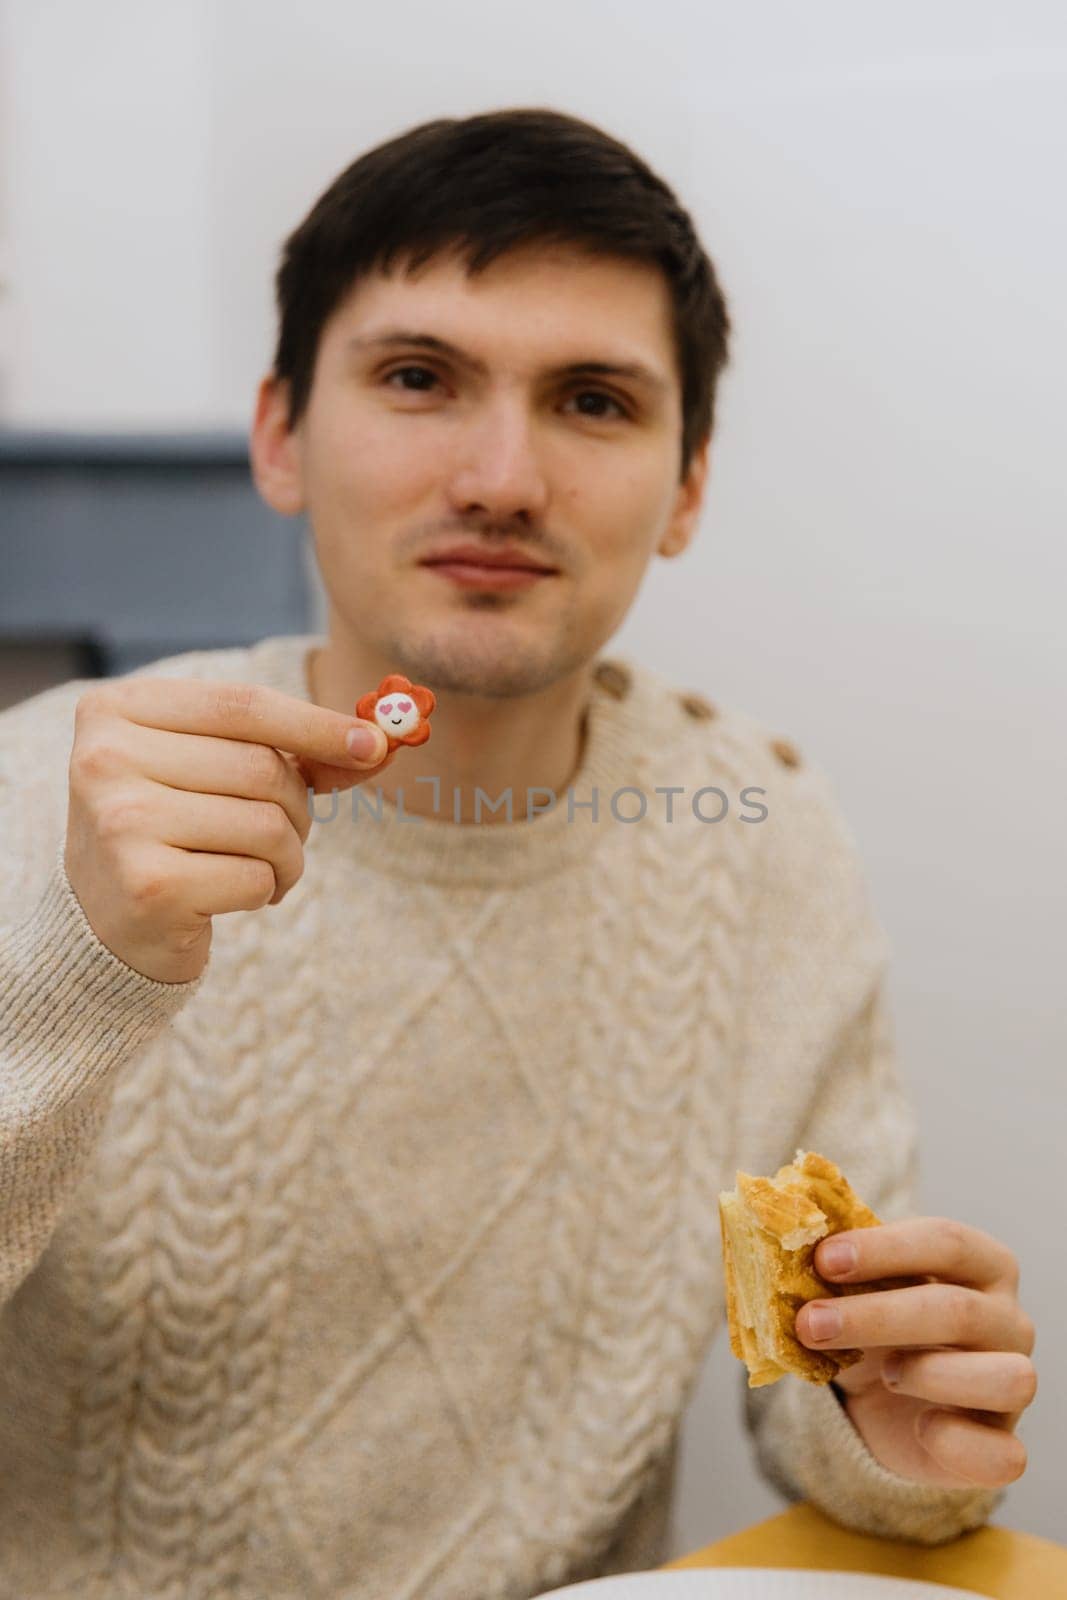 One young handsome Caucasian guy with a smile shows a surprise toy from an eaten piece of royal galette, sitting at a table in the kitchen, close-up side view.